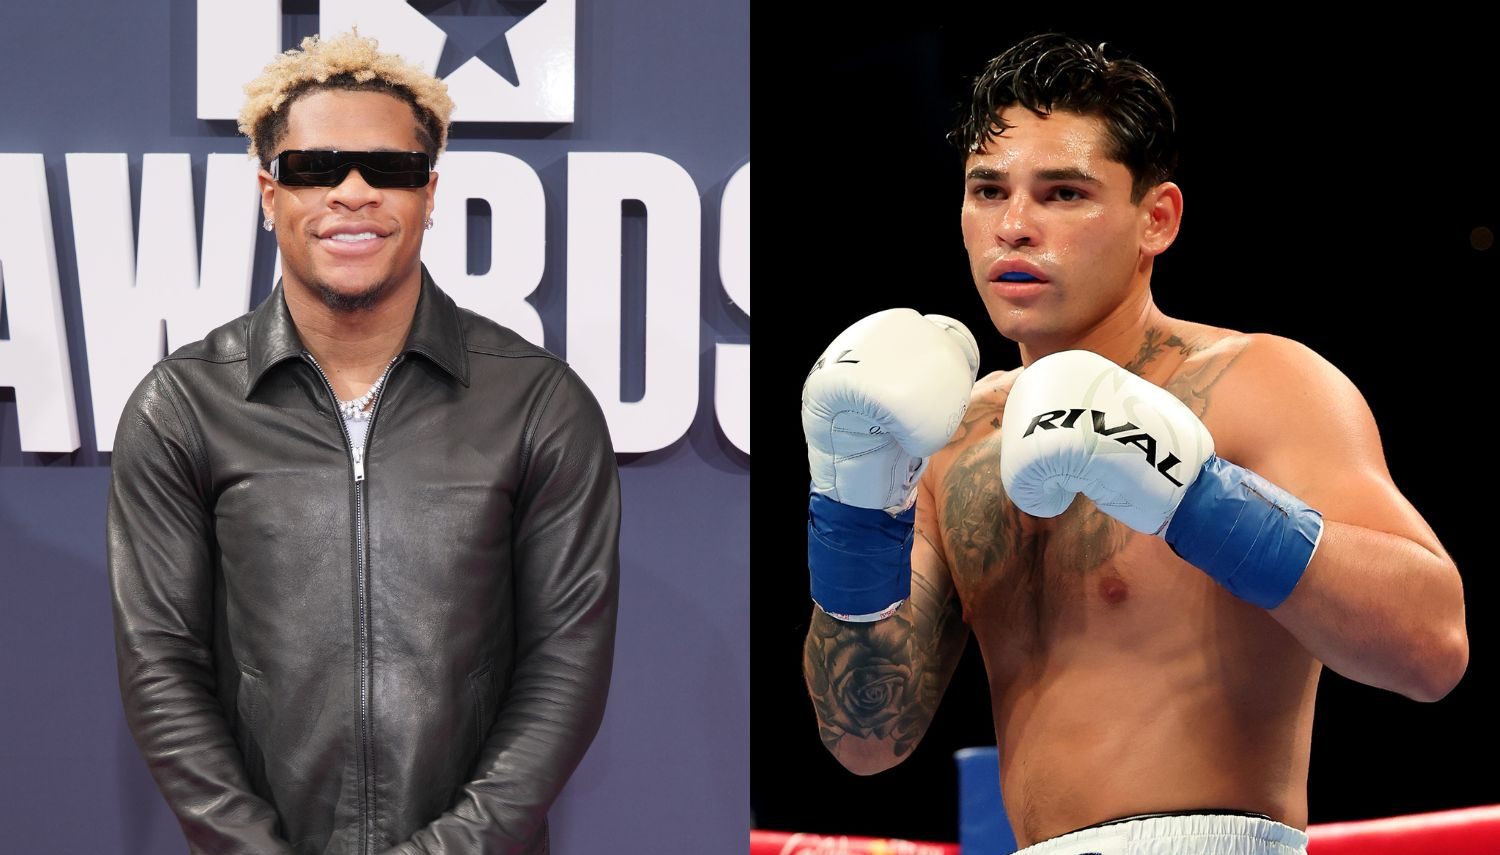 Devin Haney Reacts To Ryan Garcia’s Boxing Match Victory As Garcia Trolls Him Online